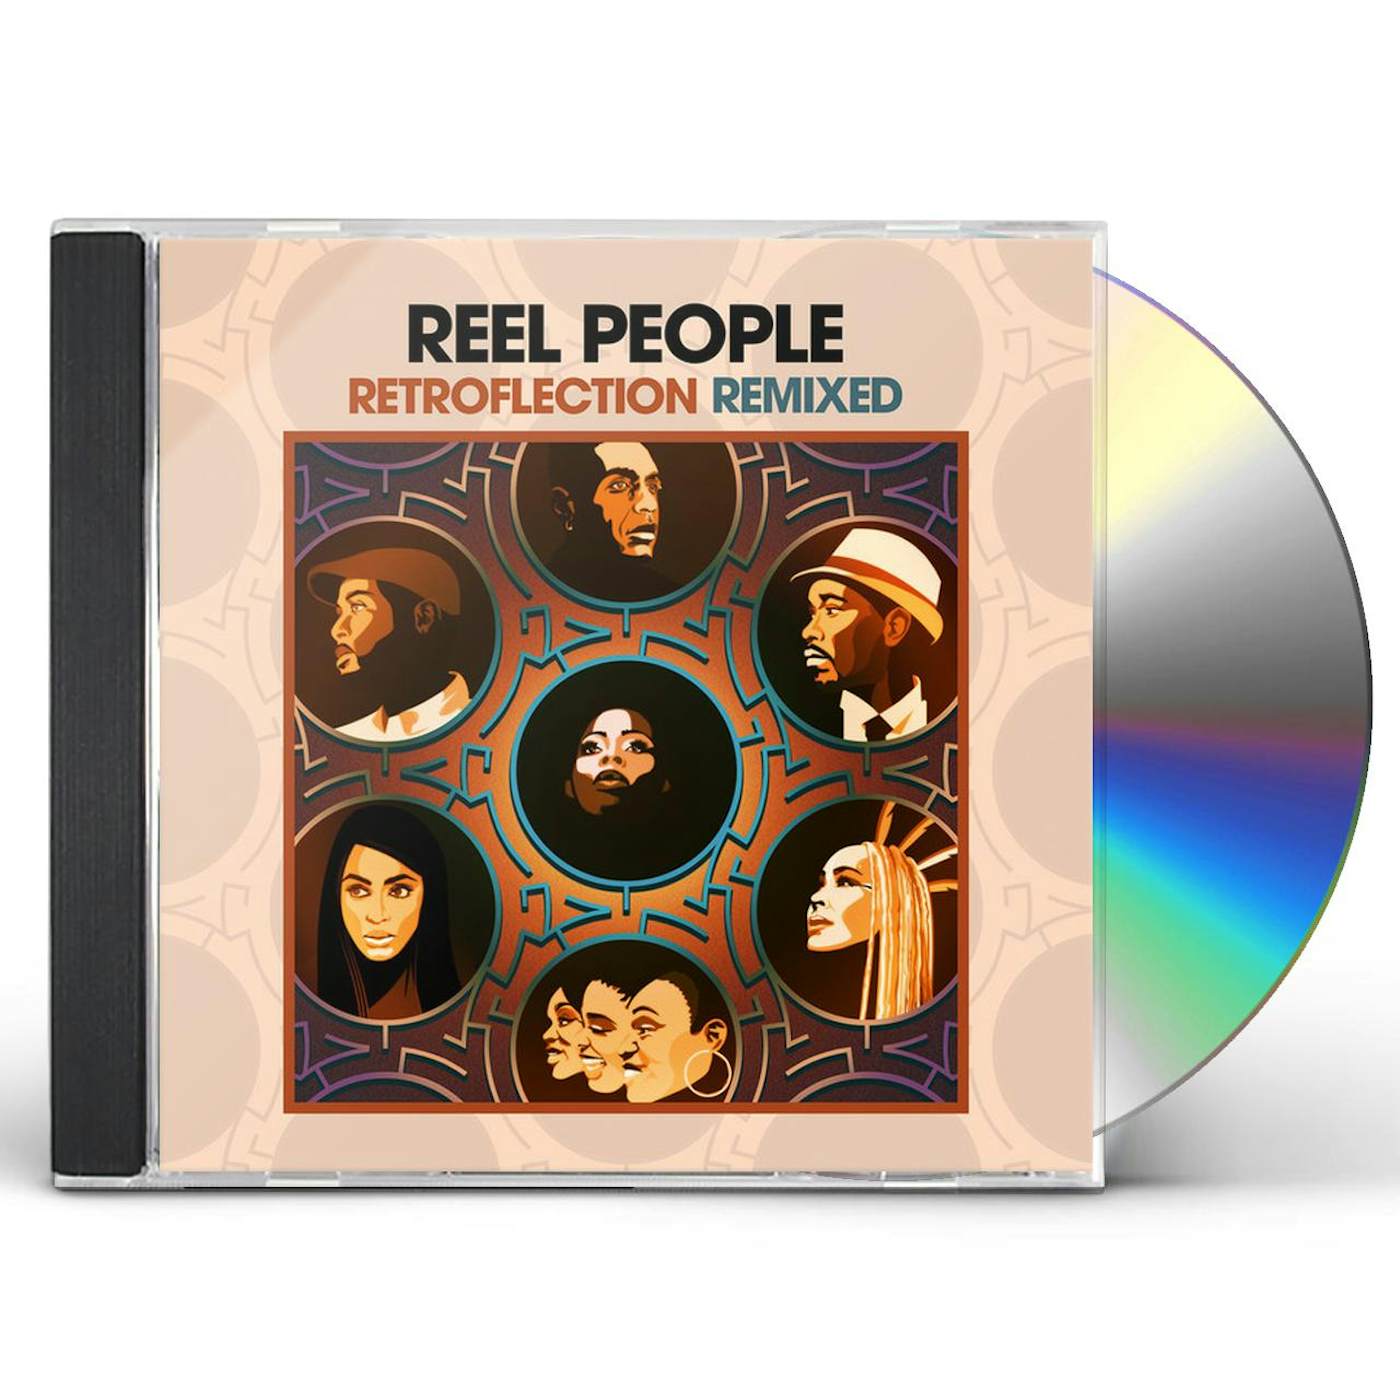 Reel People RETROFLECTION REMIXED CD